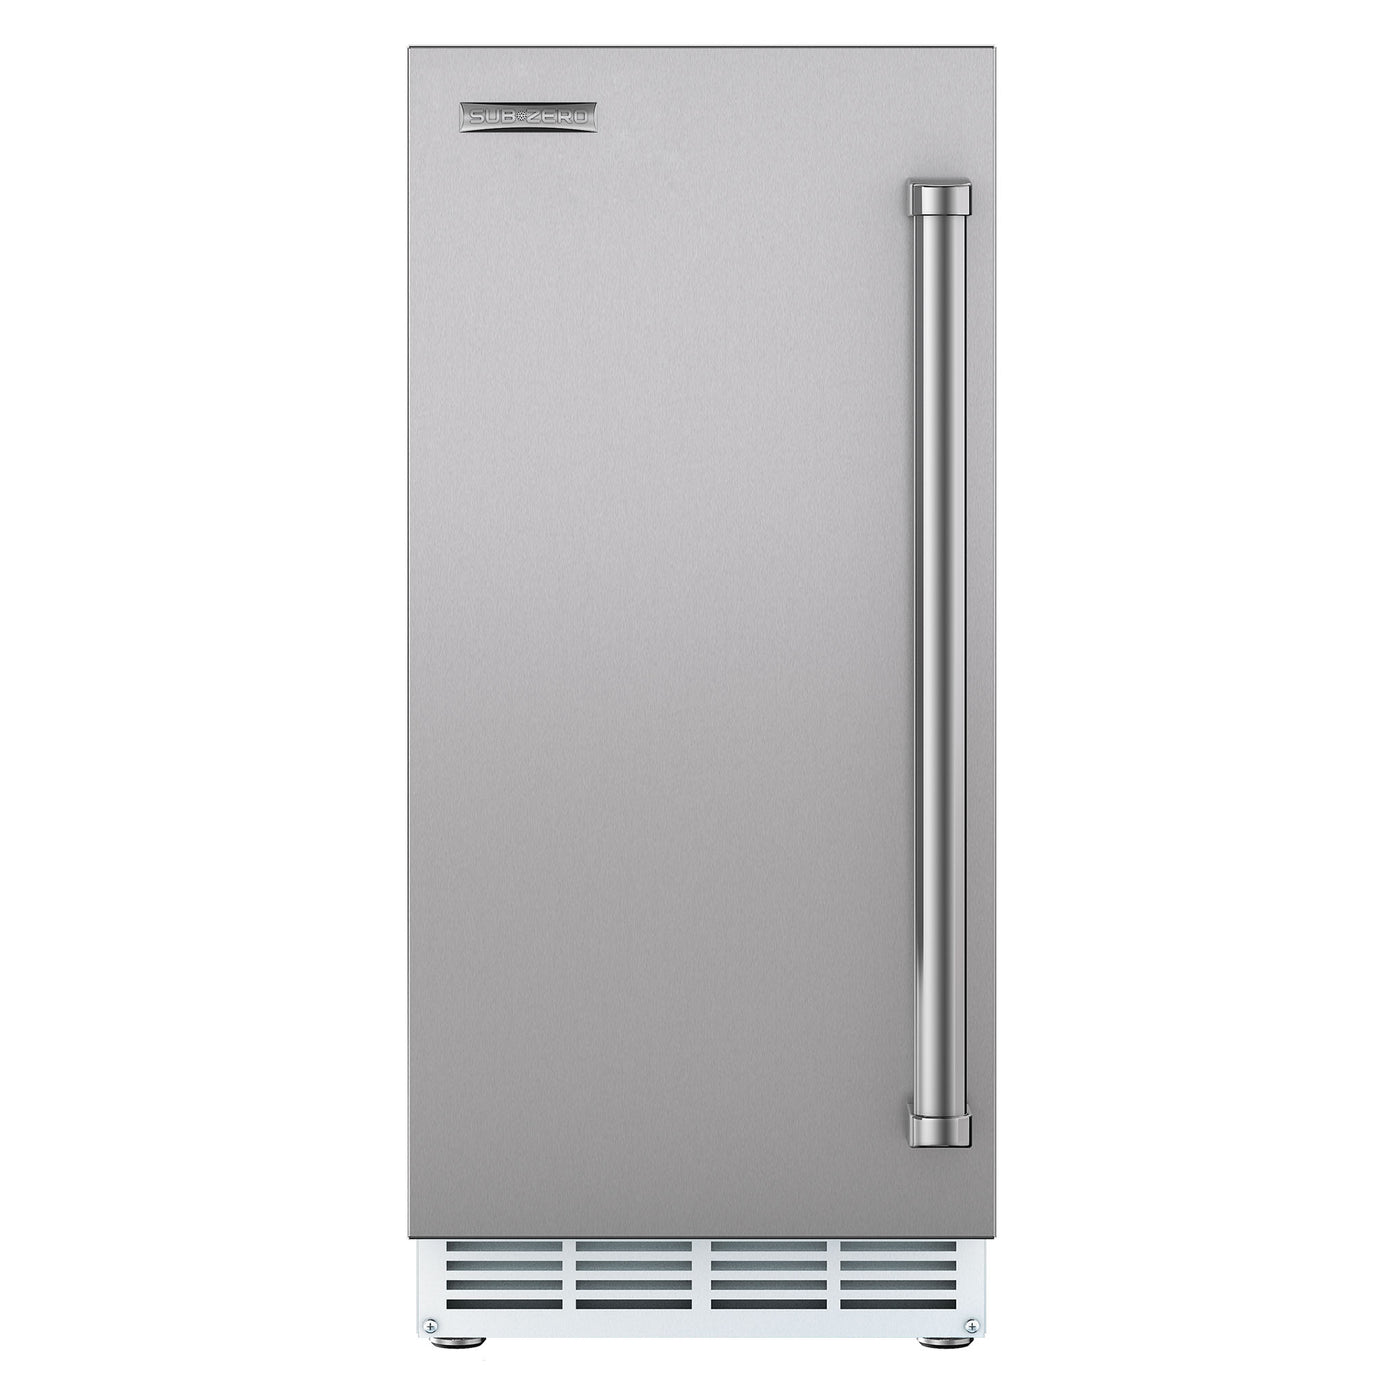 15" Ice Maker with Pump - Panel Ready